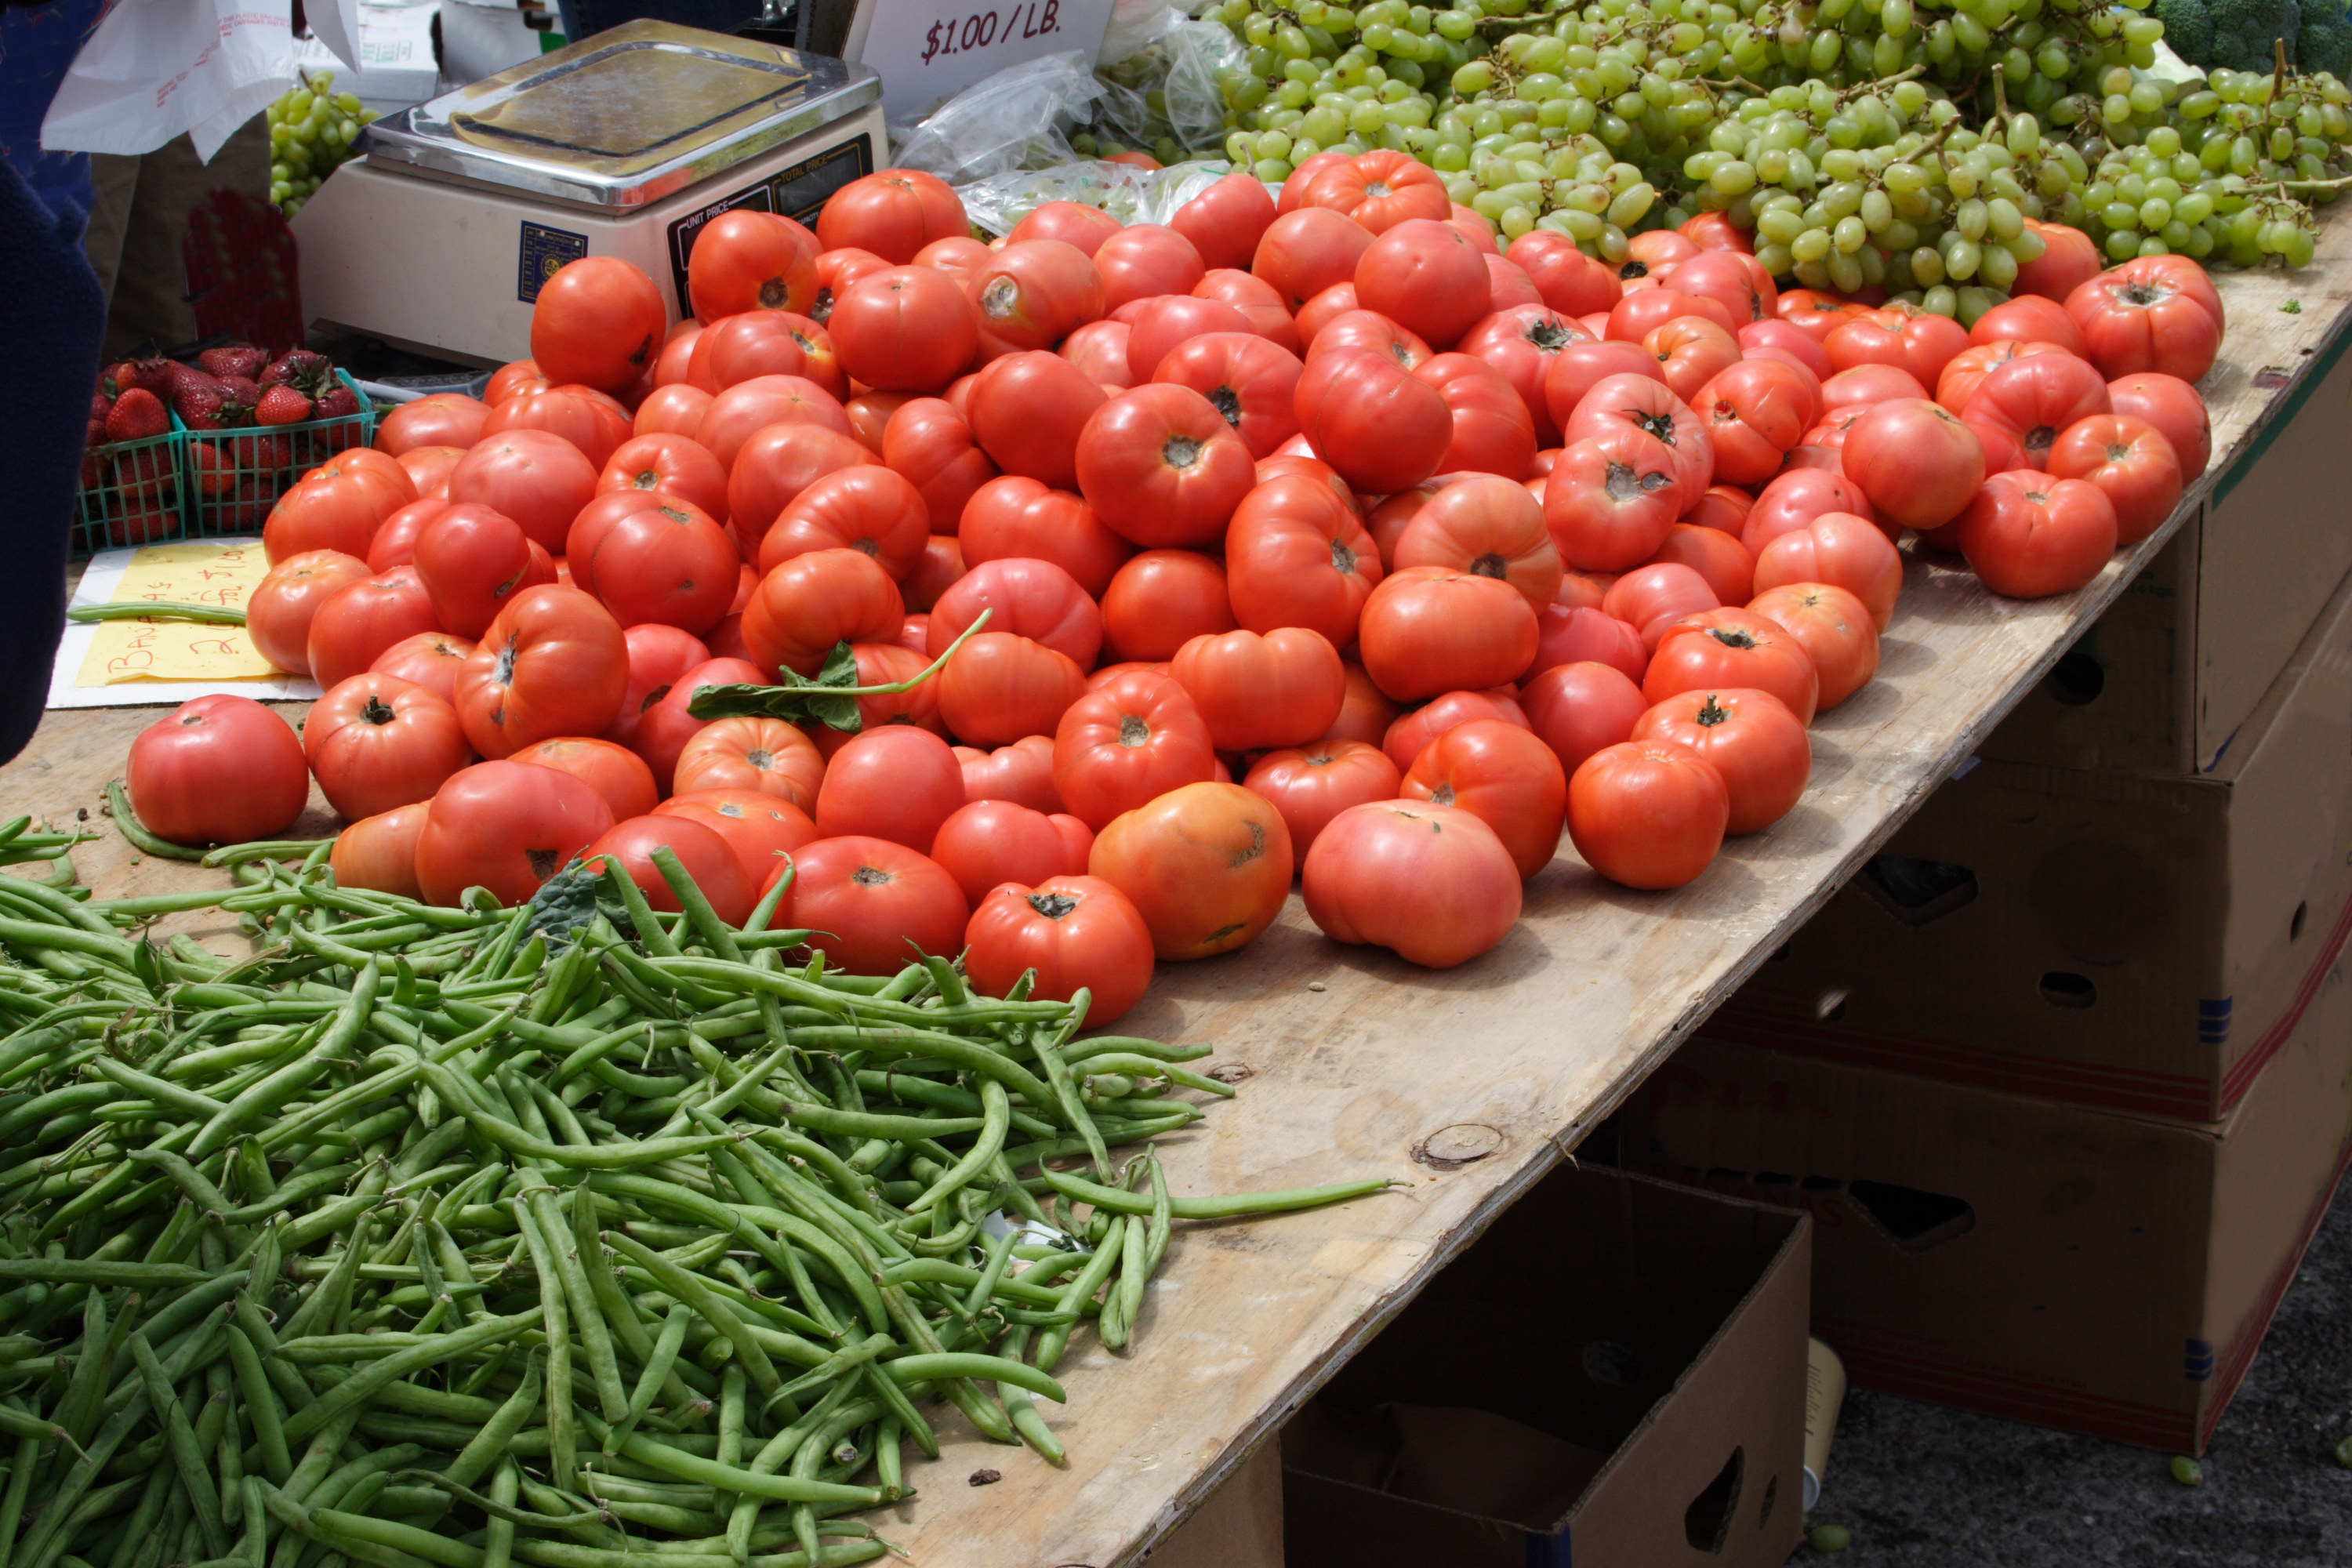 Fresh tomatoes and beans for sale at farmers market